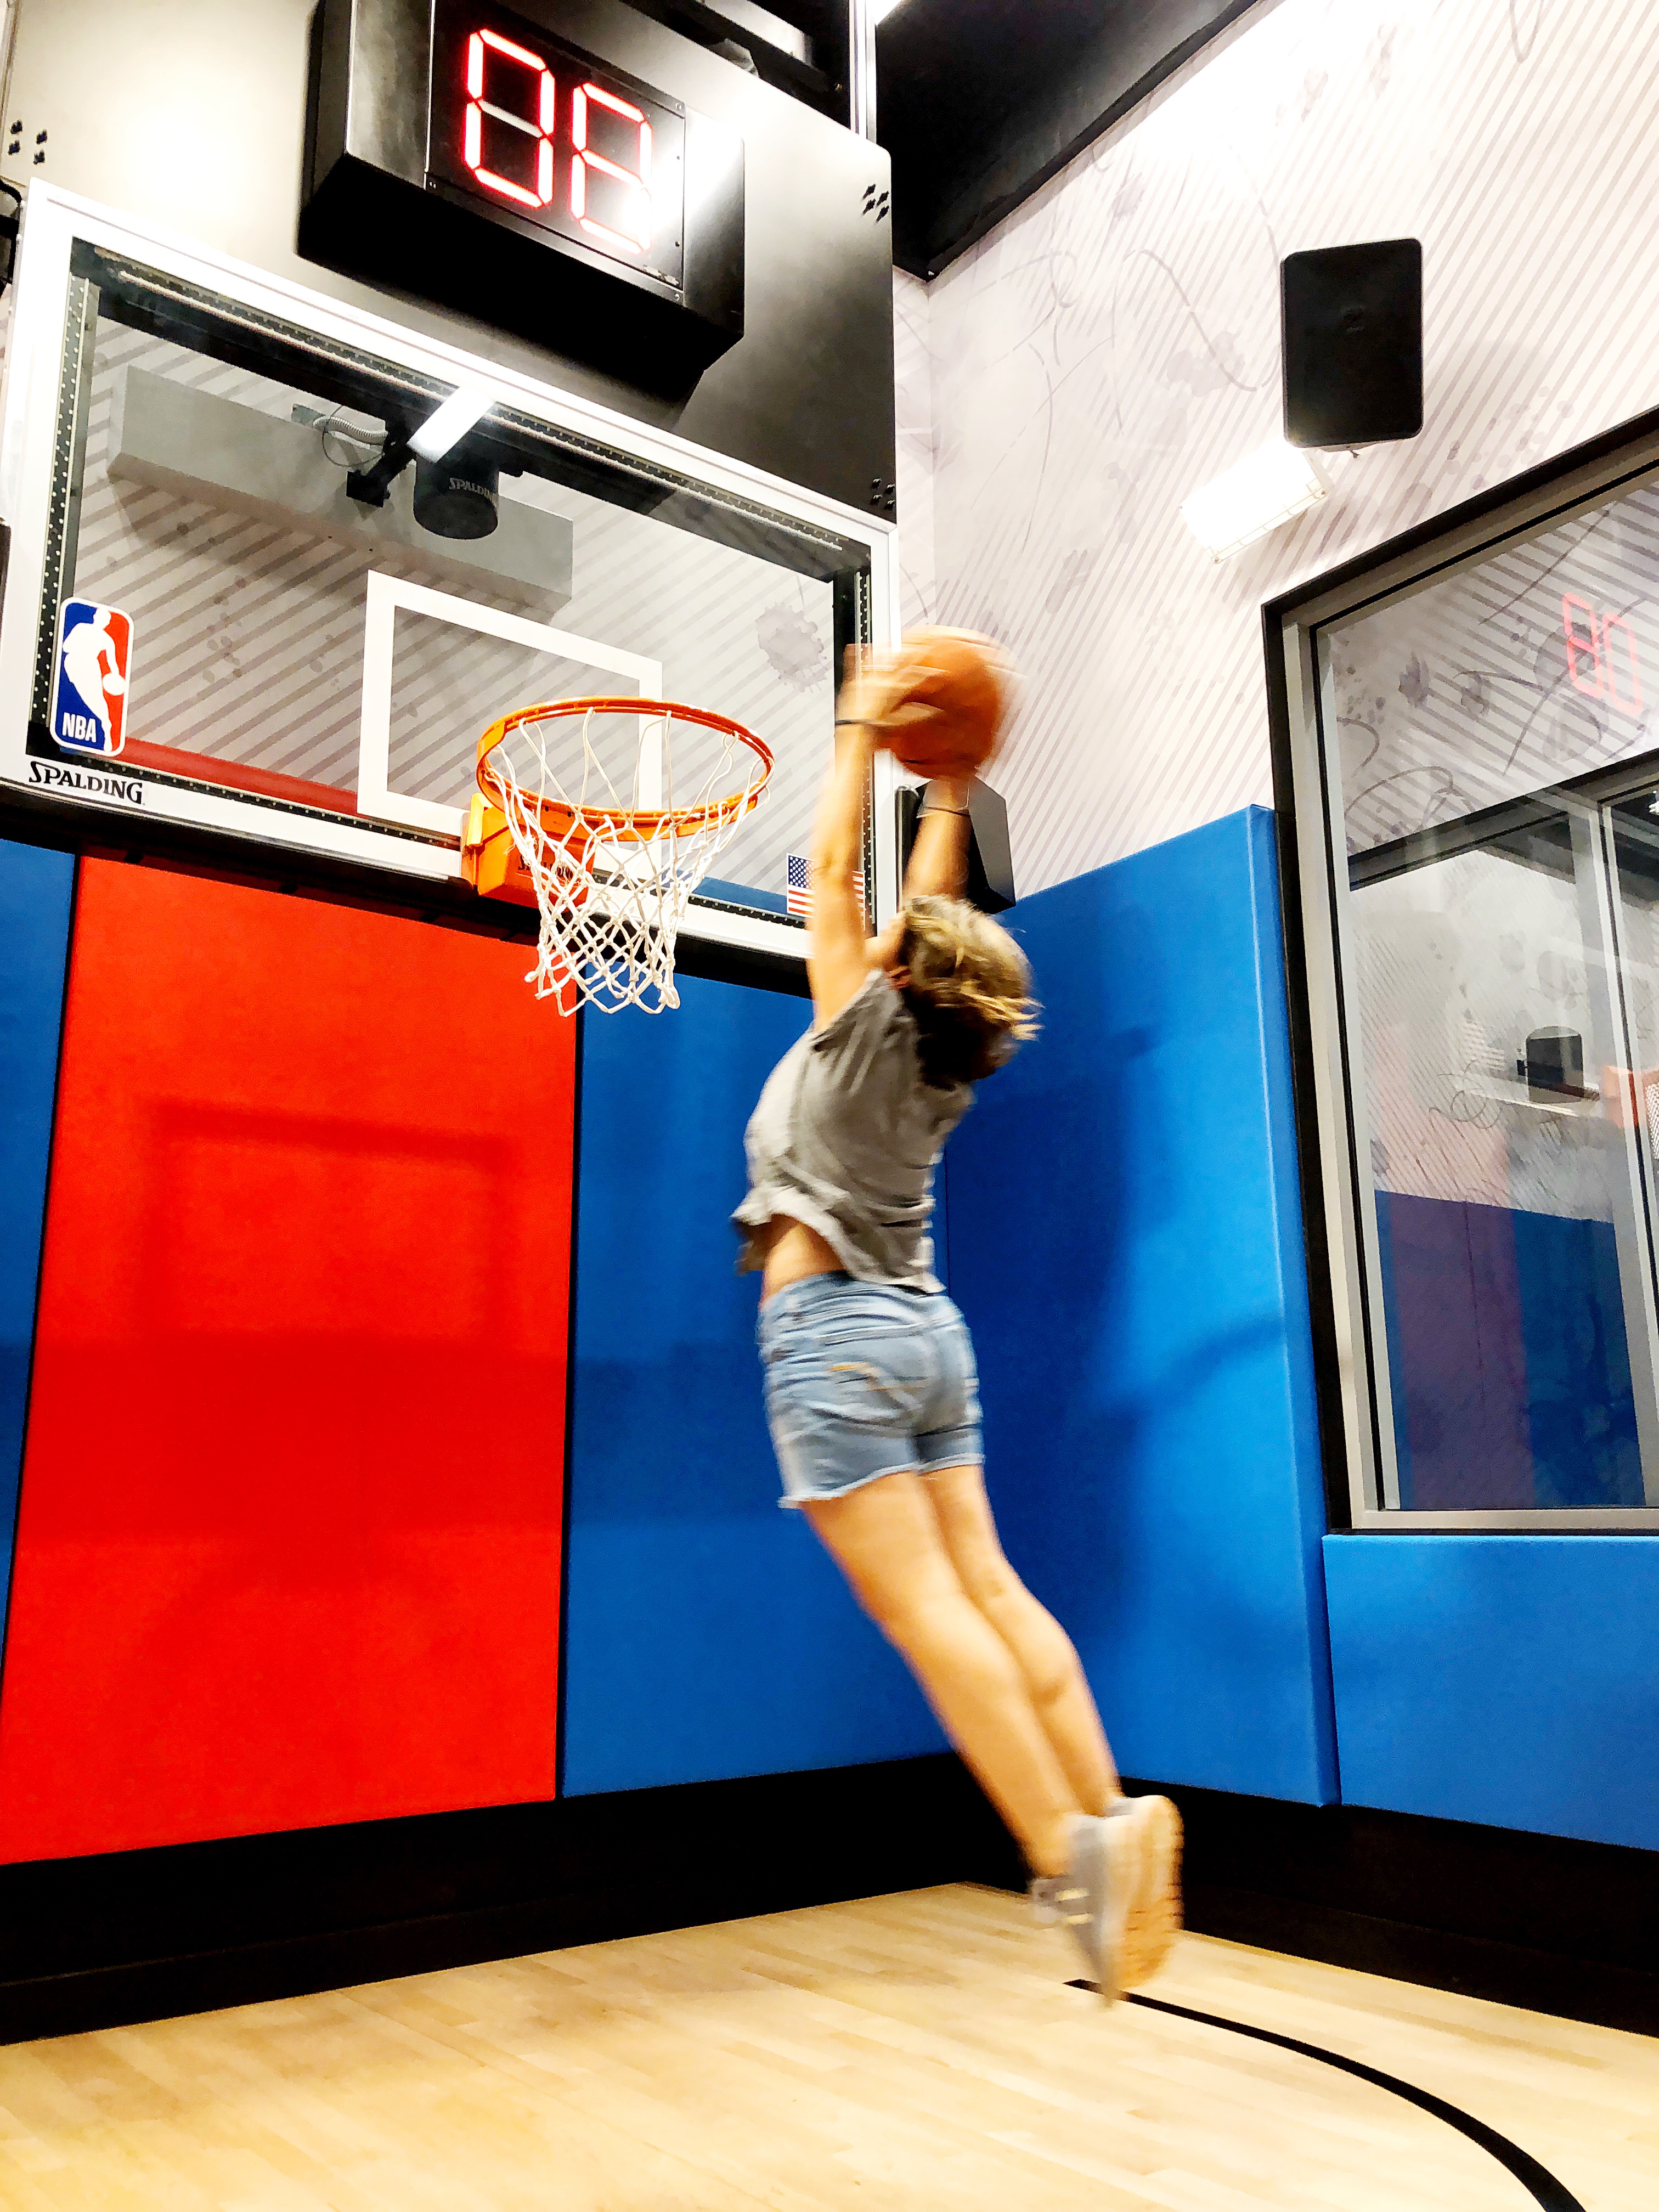 Things To Do at Disney Springs: NBA Experience